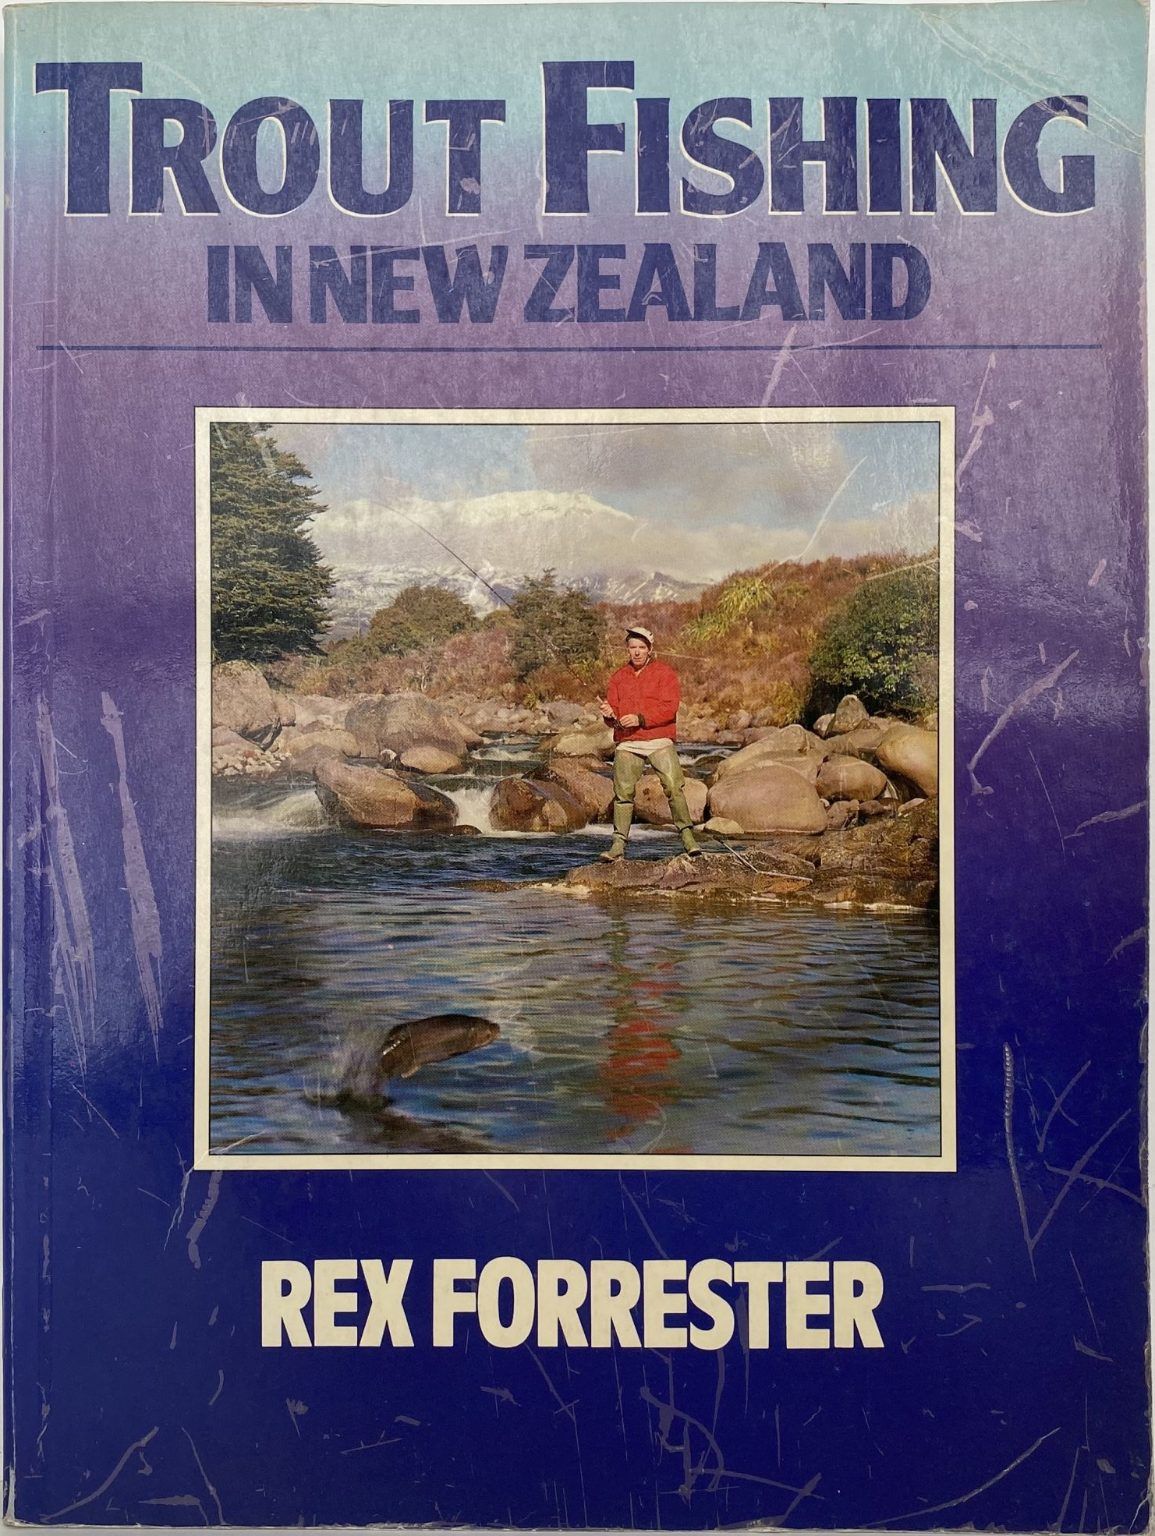 TROUT FISHING IN NEW ZEALAND